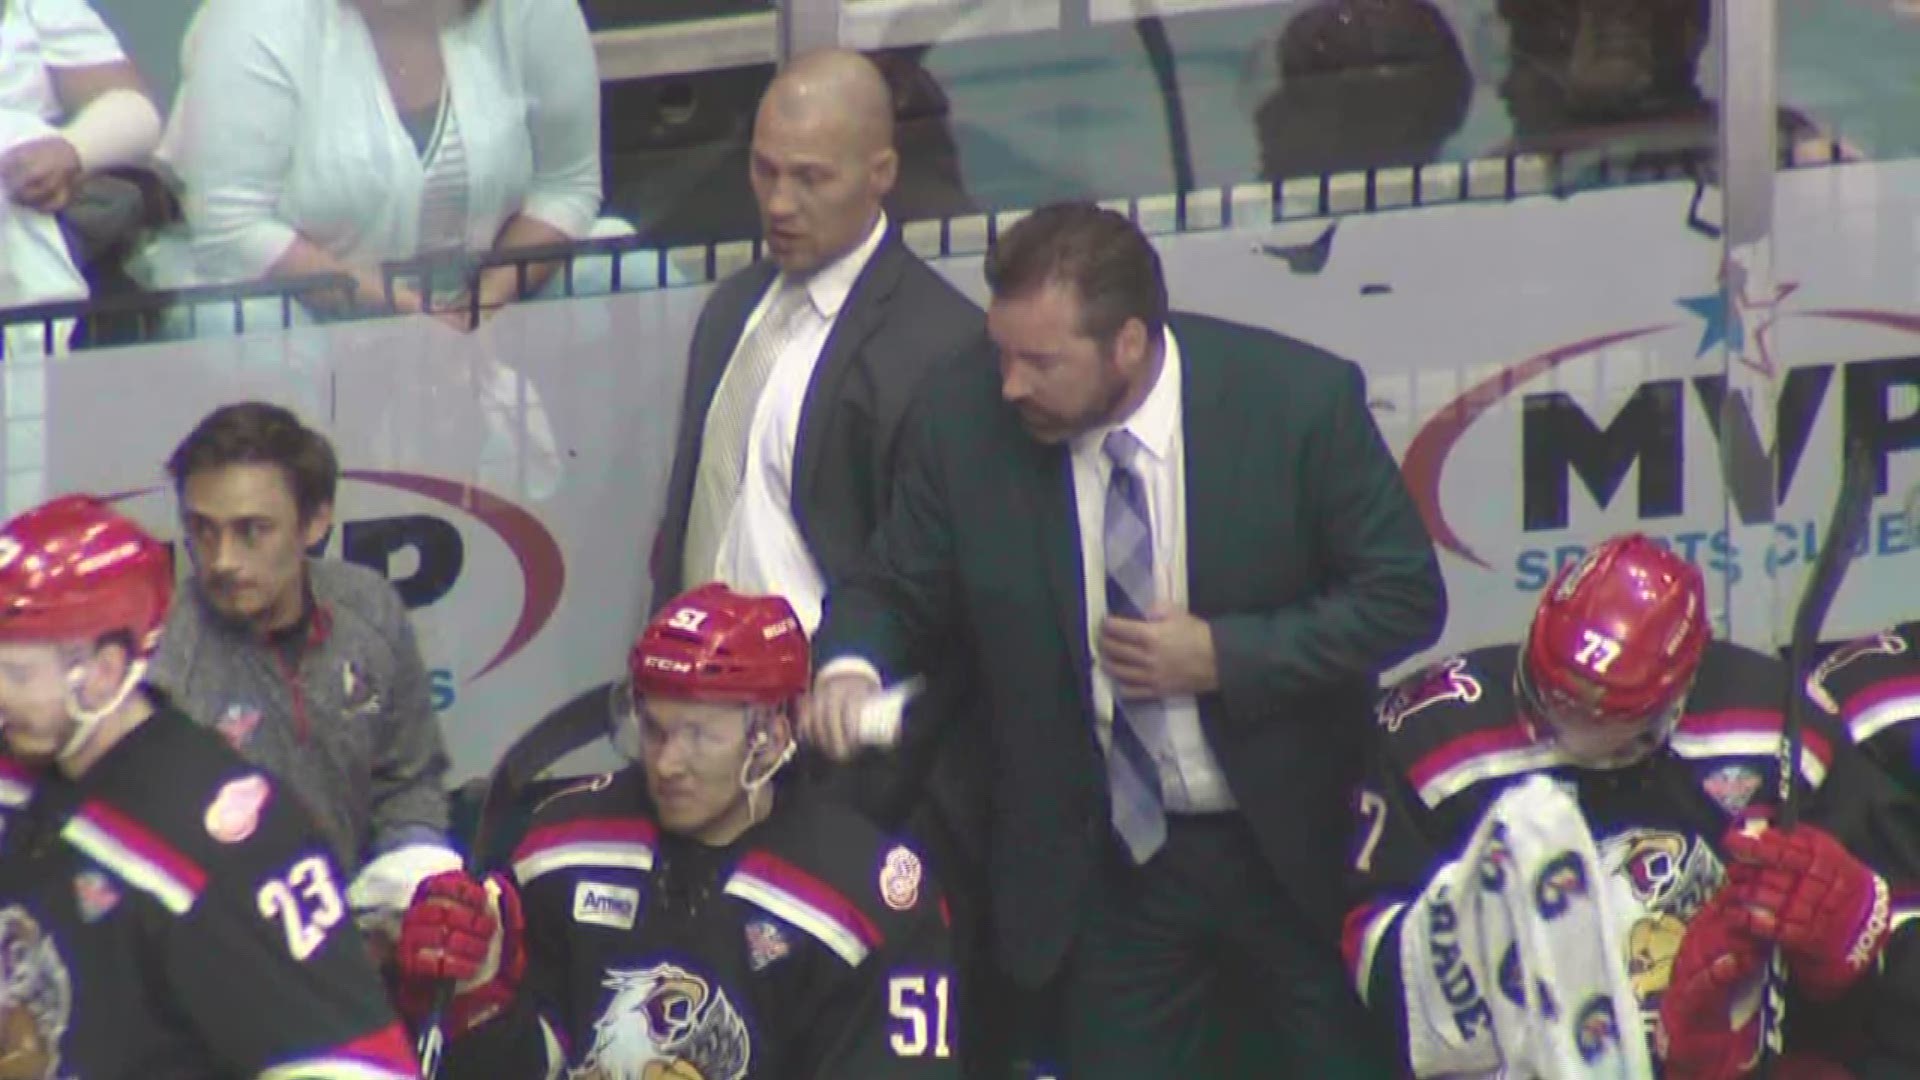 The Griffins' coach excited to be back in Grand Rapids